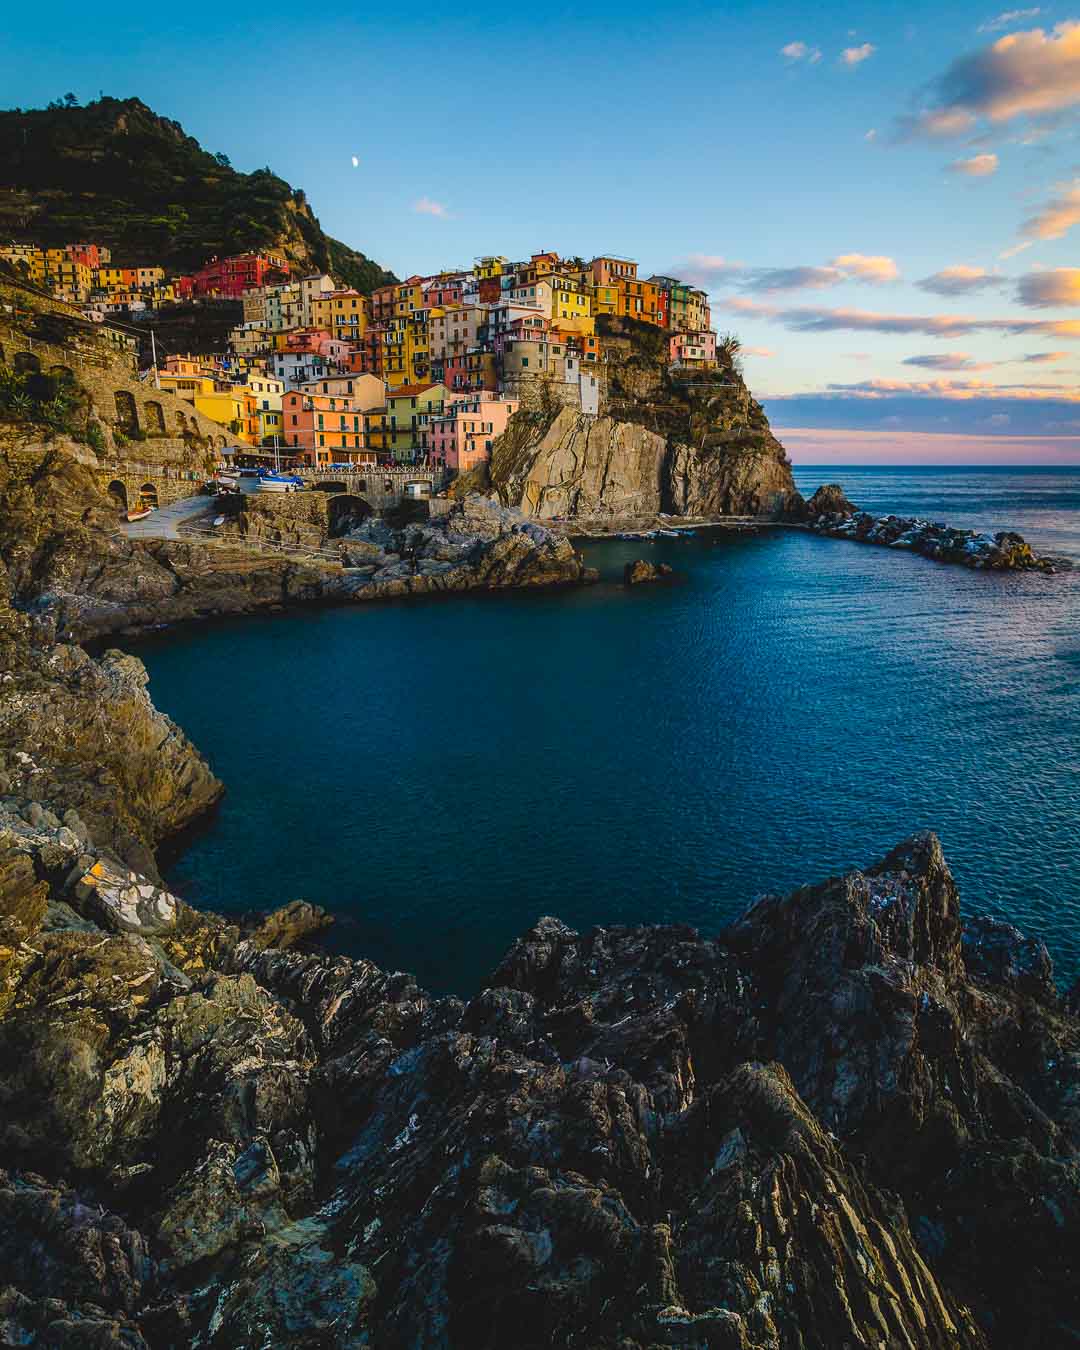 view on the manarola beach one of the best cinque terre italy beaches